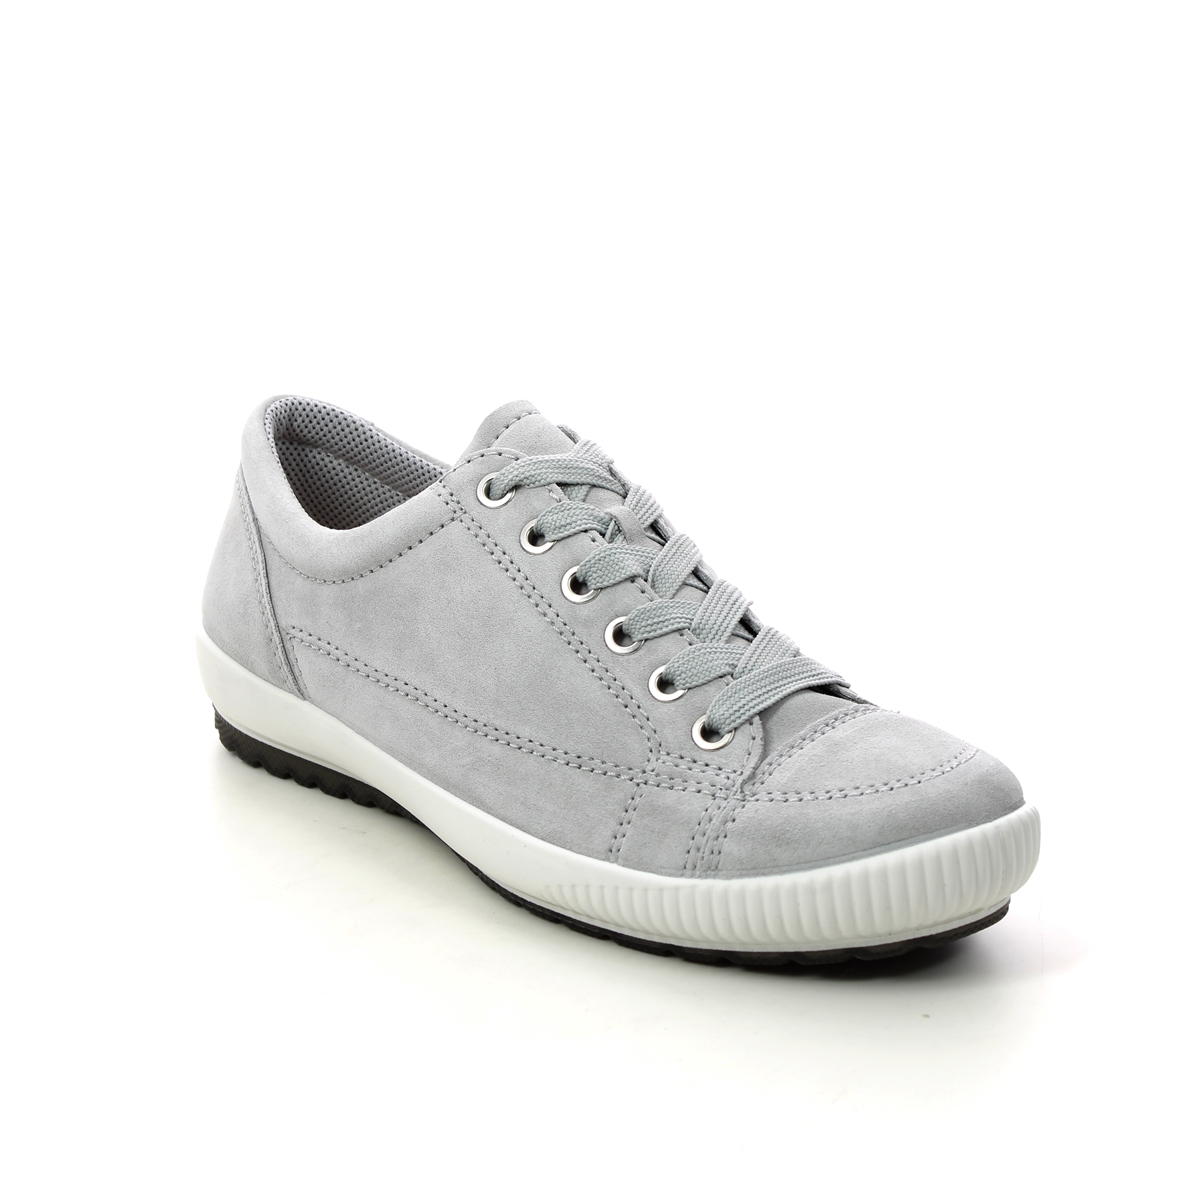 Legero Tanaro Stitch Light Grey Suede Womens Lacing Shoes 00820-25 In Size 8 In Plain Light Grey Suede